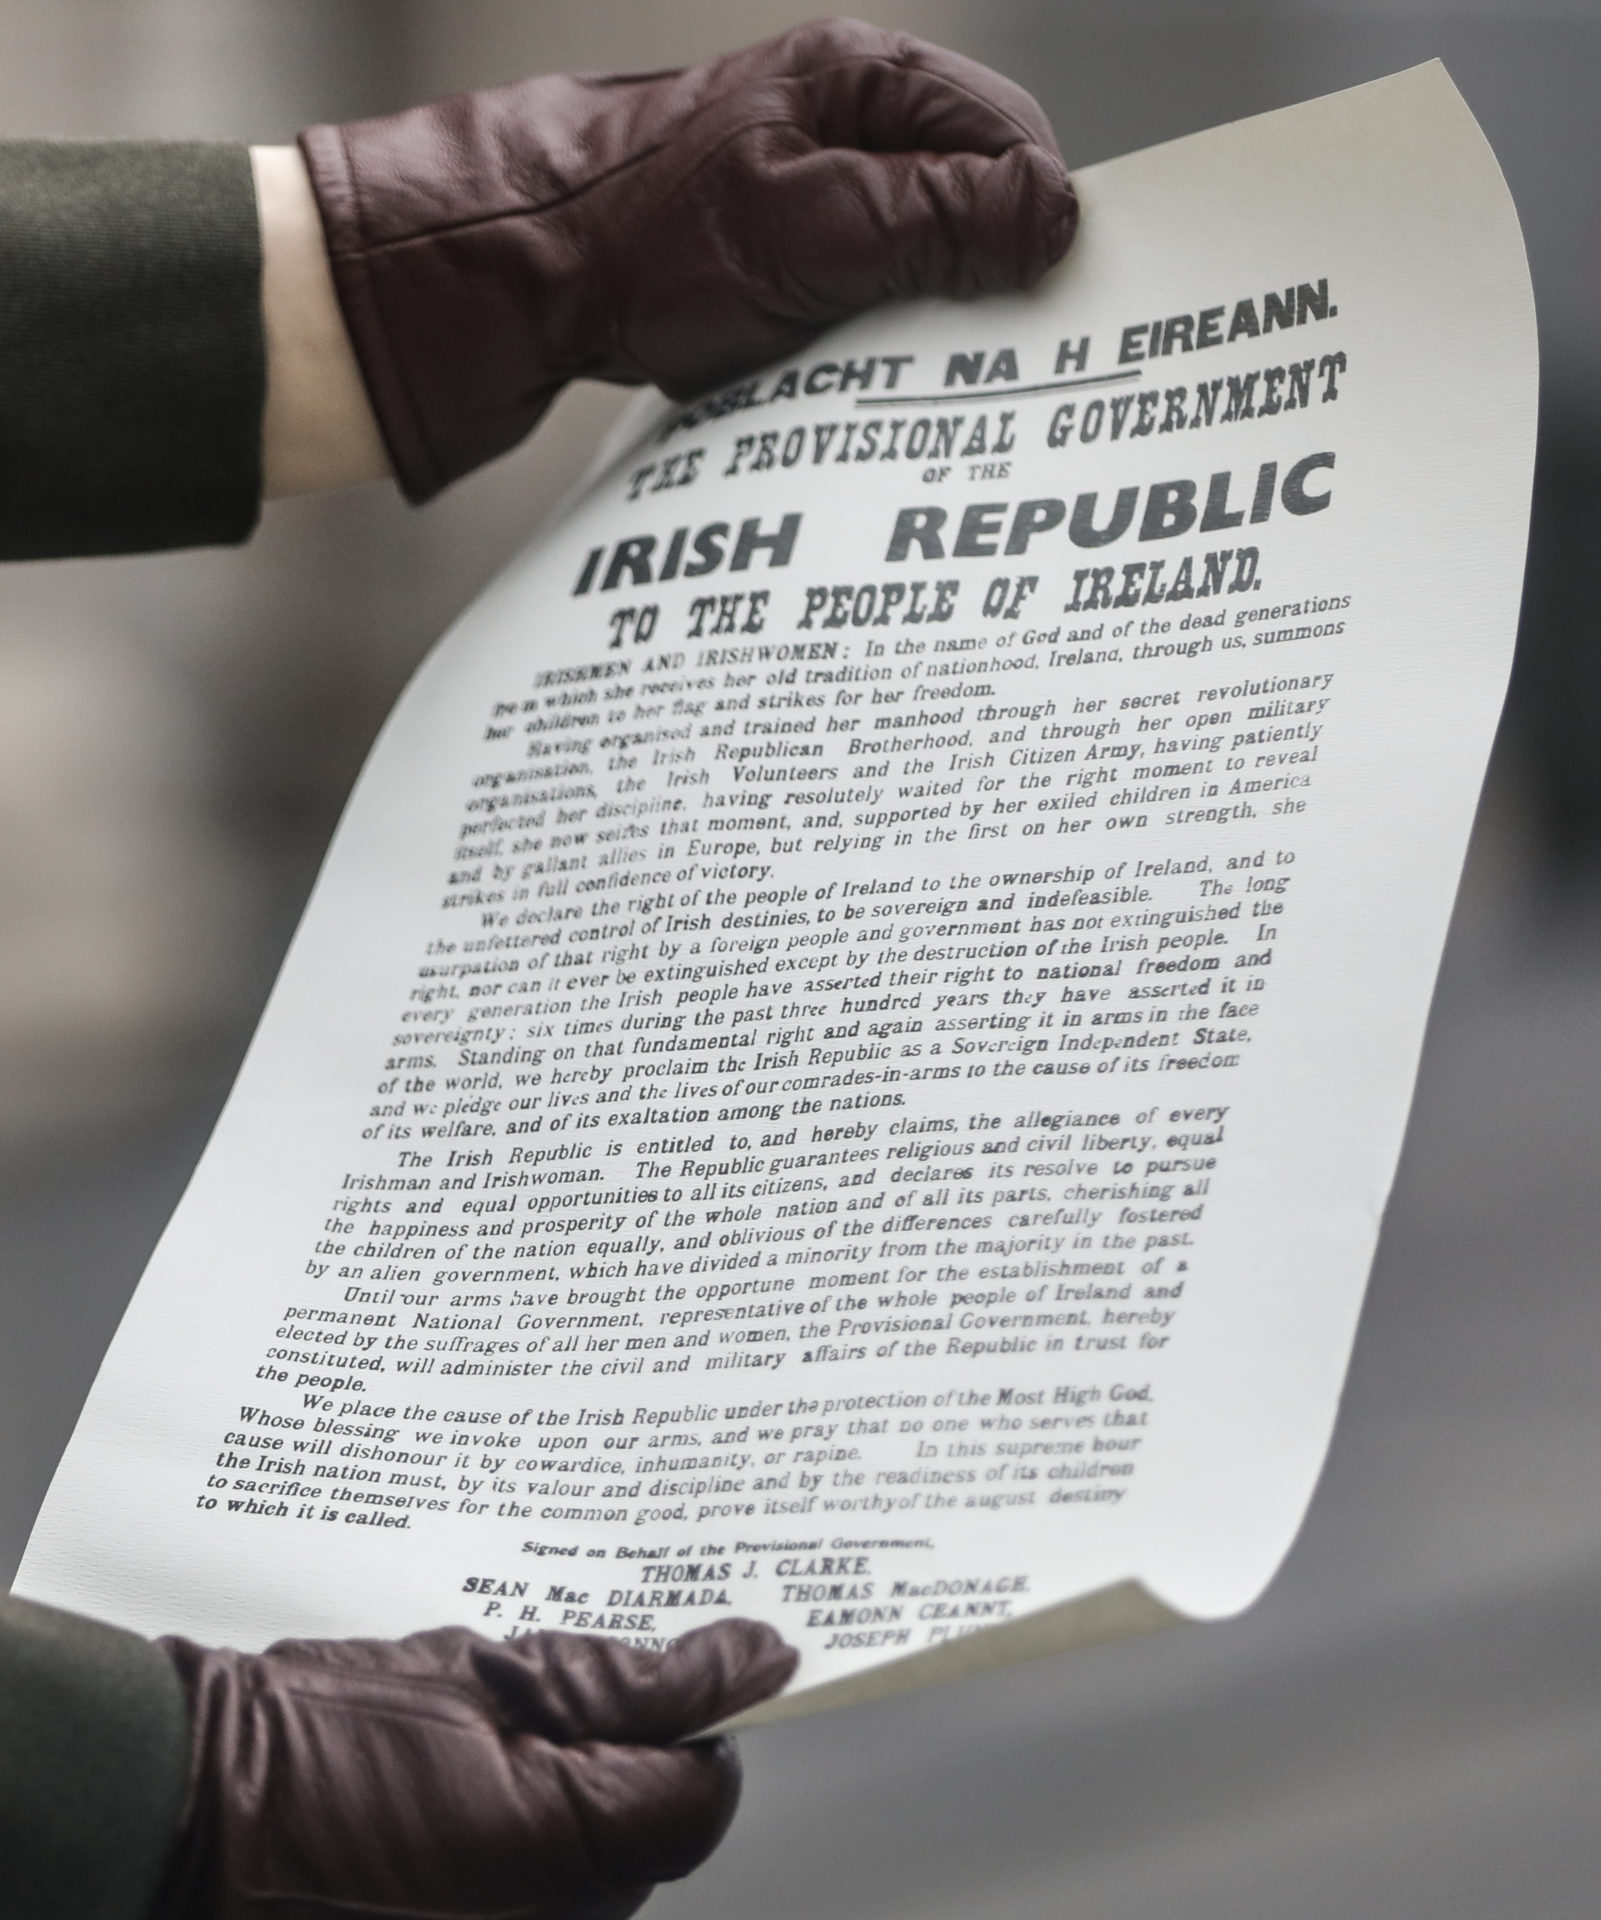 A member of the Defence Forces holding the Proclamation of Independence outside the GPO on O'Connell Street in Dublin for the 1916 commemoration